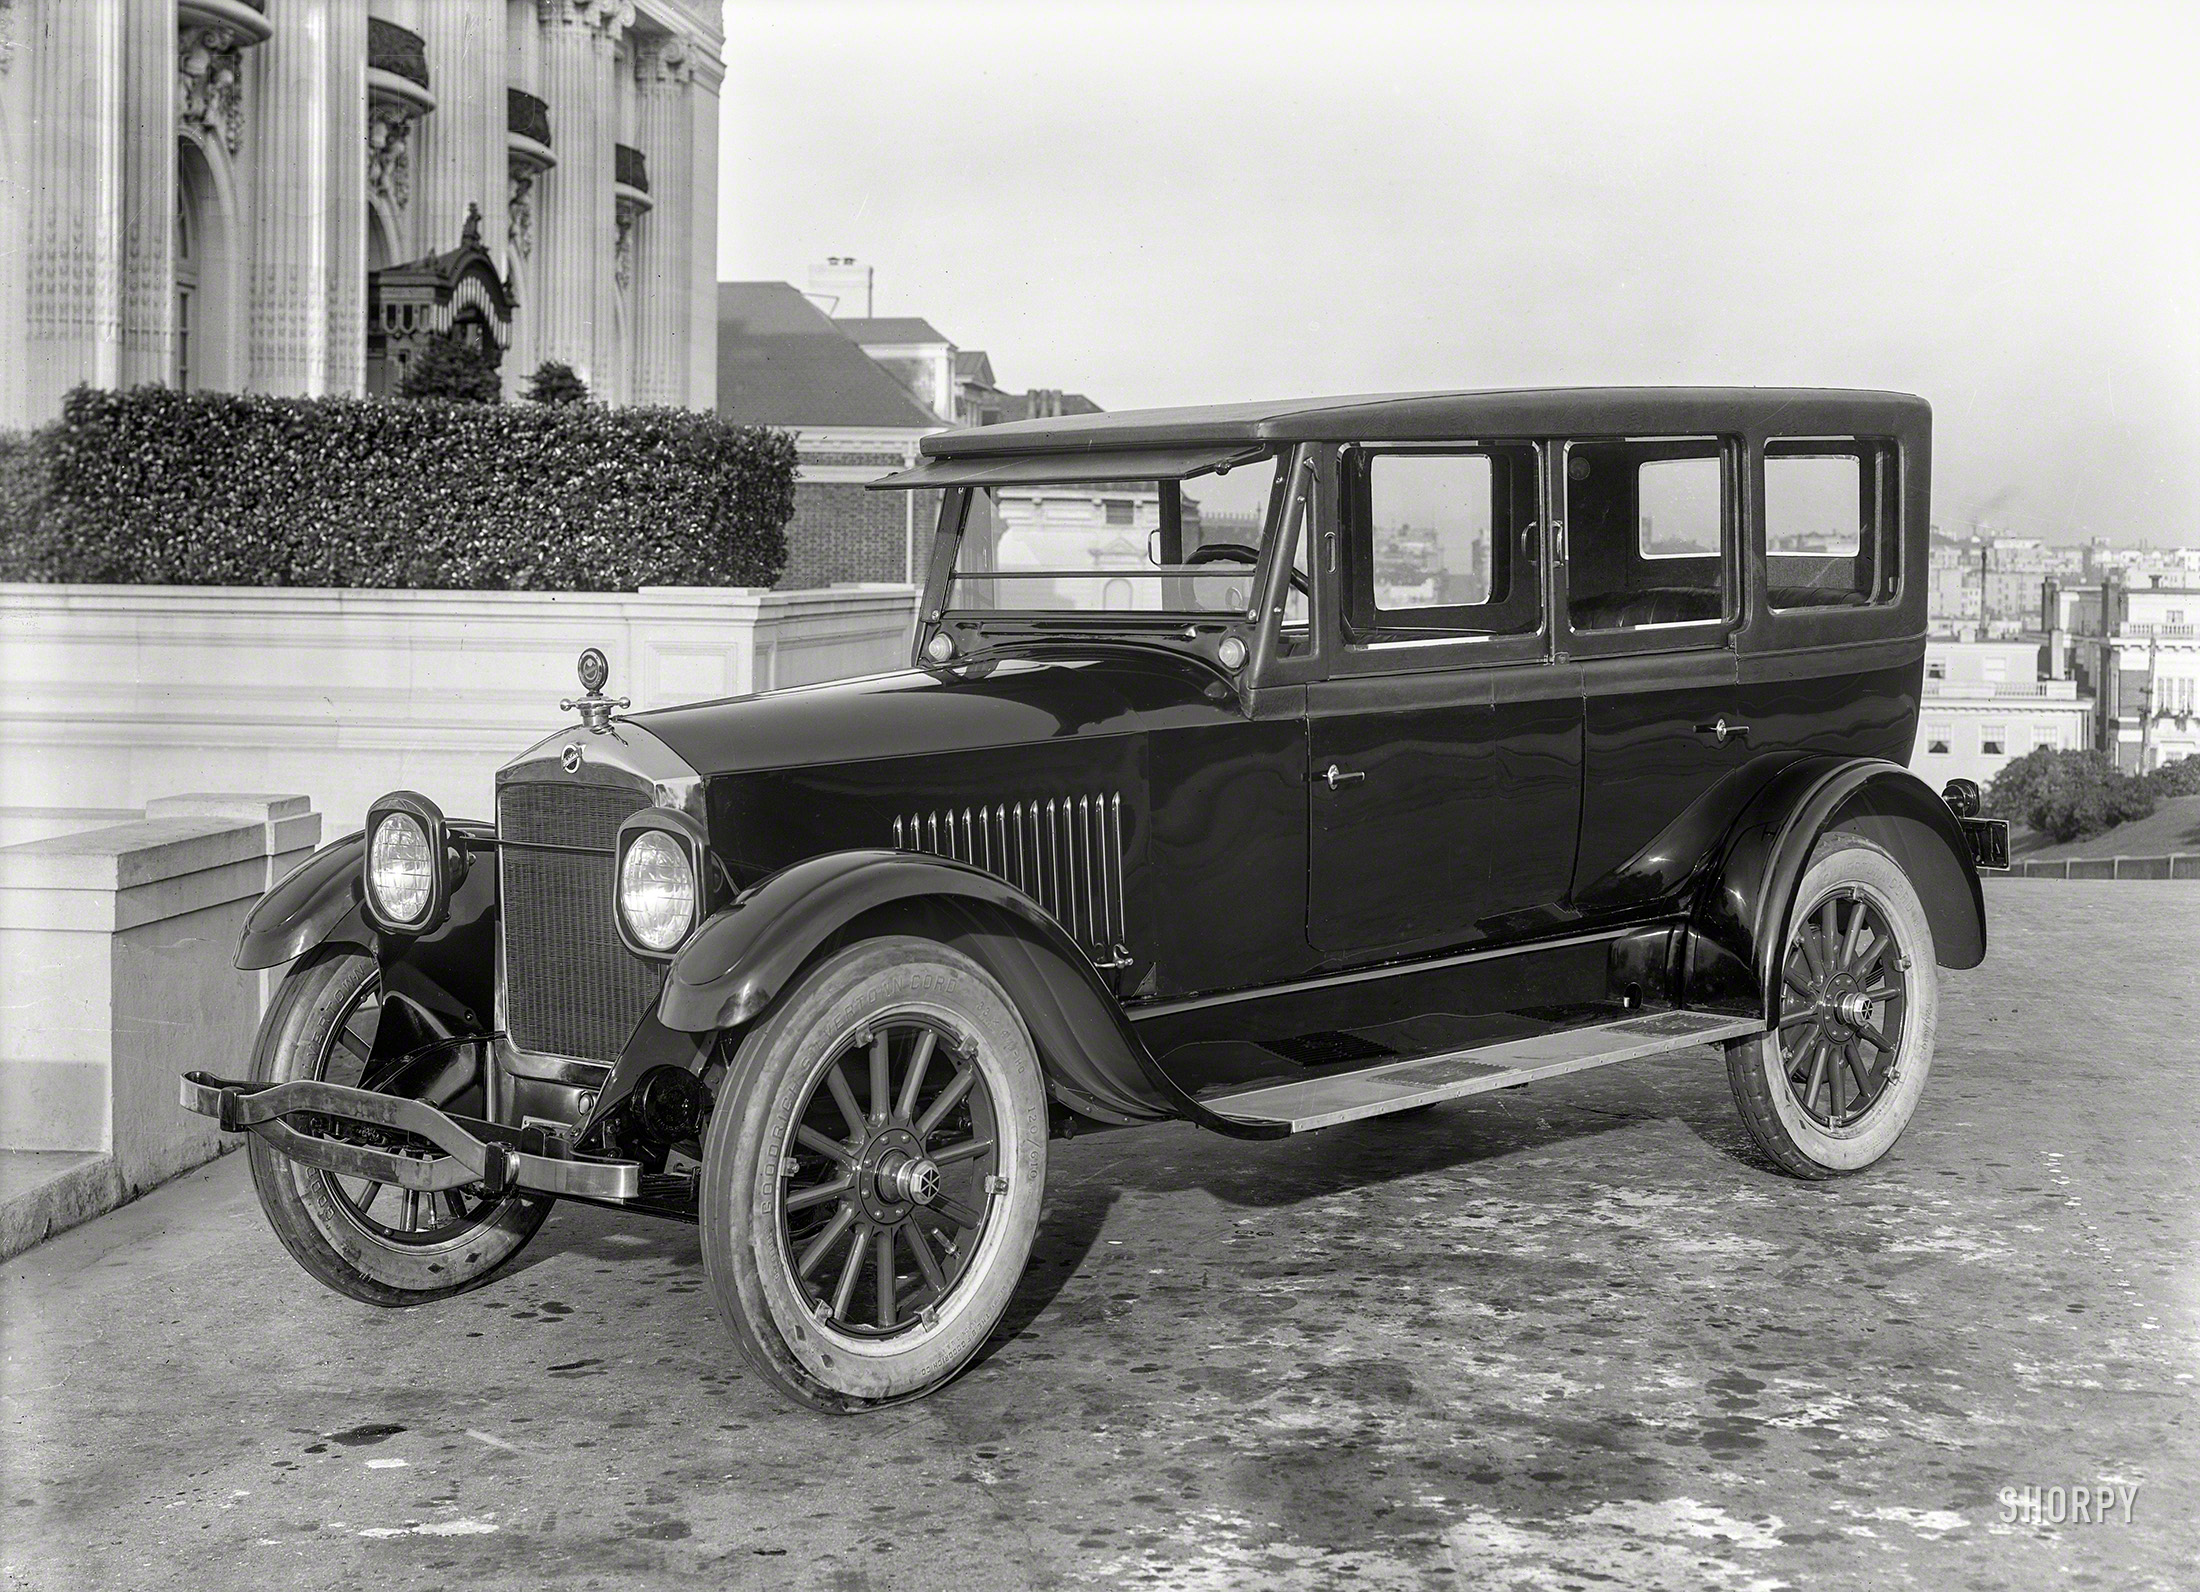 San Francisco circa 1921. "Studebaker Special Six touring car at Spreckels Mansion." 5x7 inch glass negative by Christopher Helin. View full size.